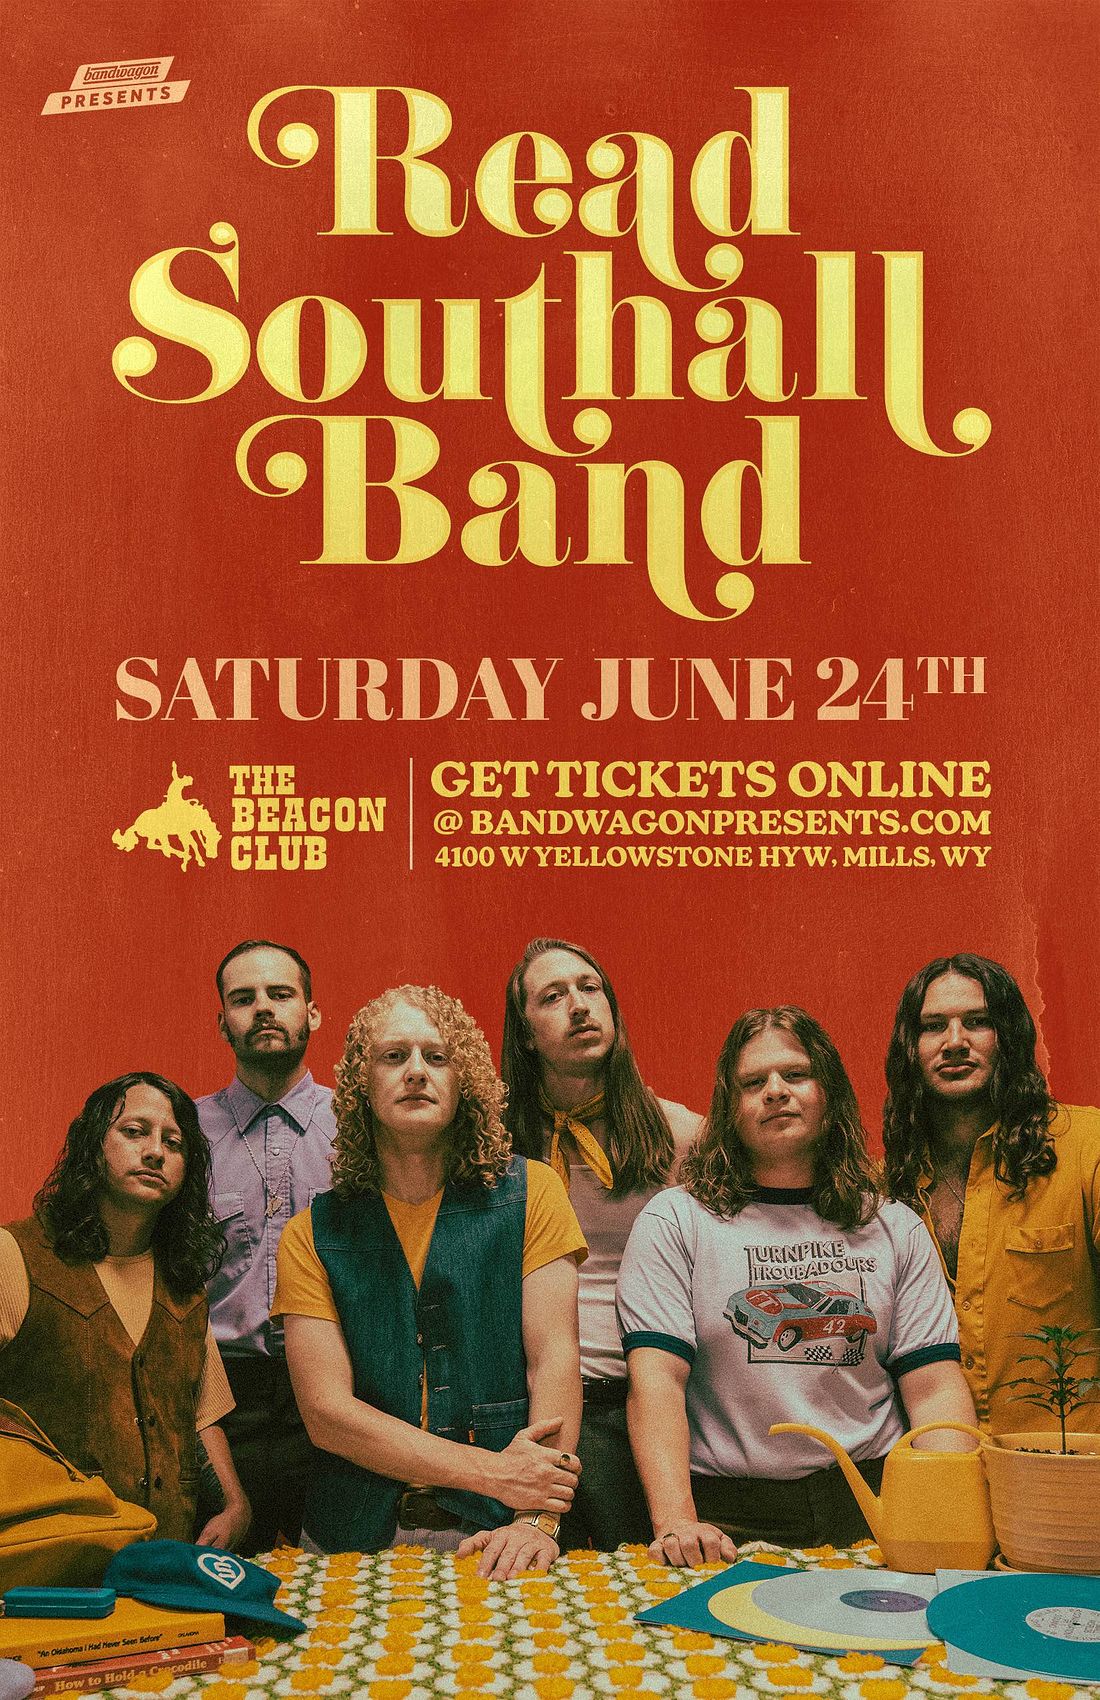 Read Southall Band Tickets at Beacon Club in Mills by BandWagon